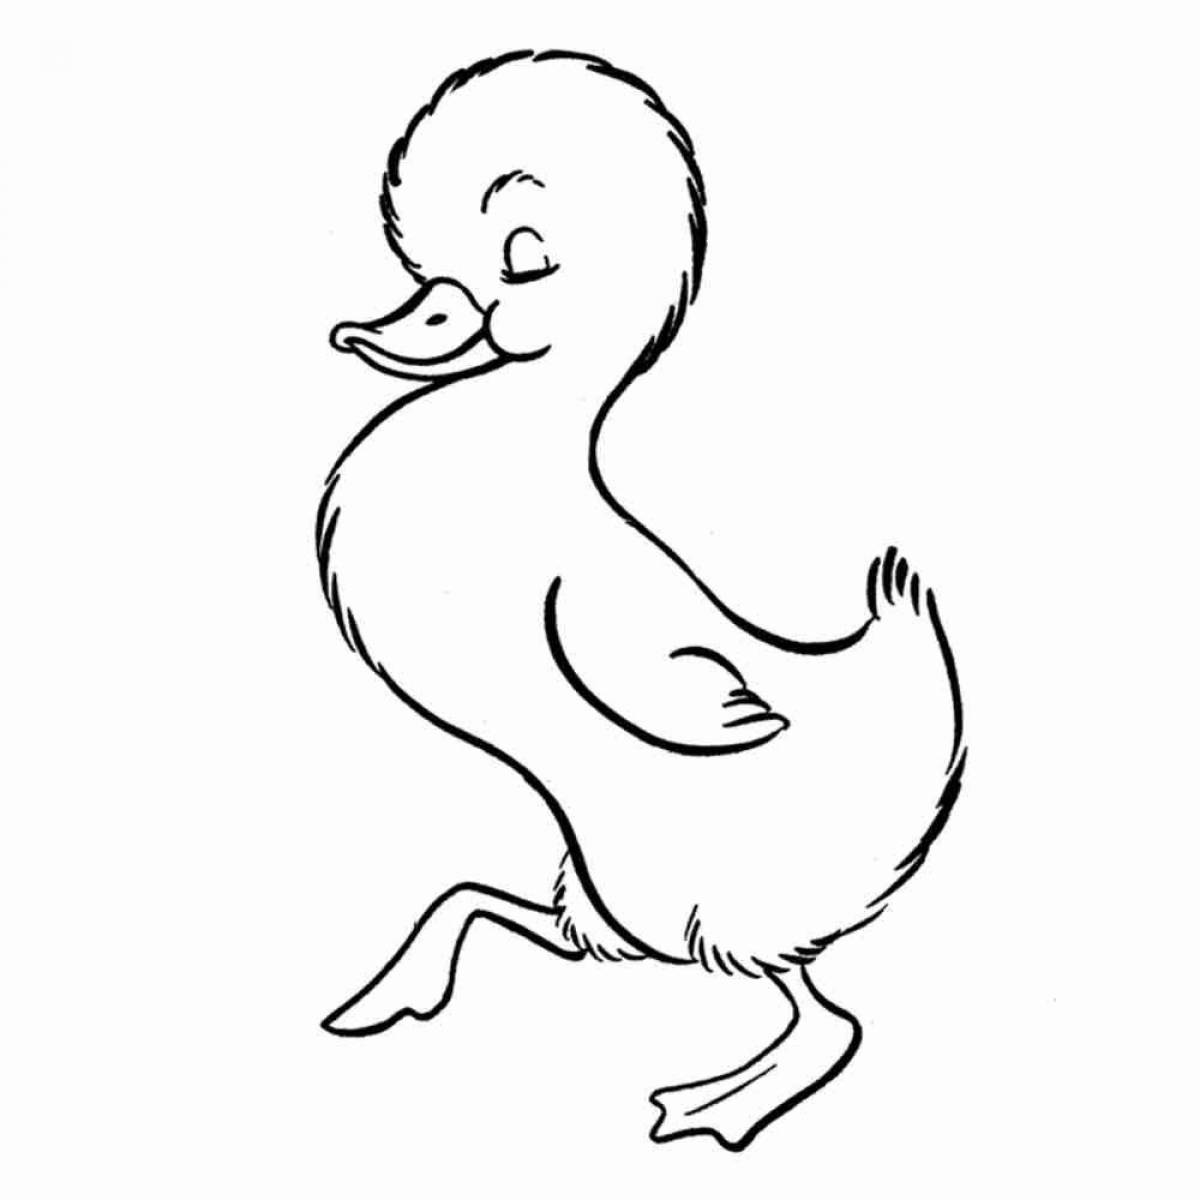 Rampant duck coloring book for kids